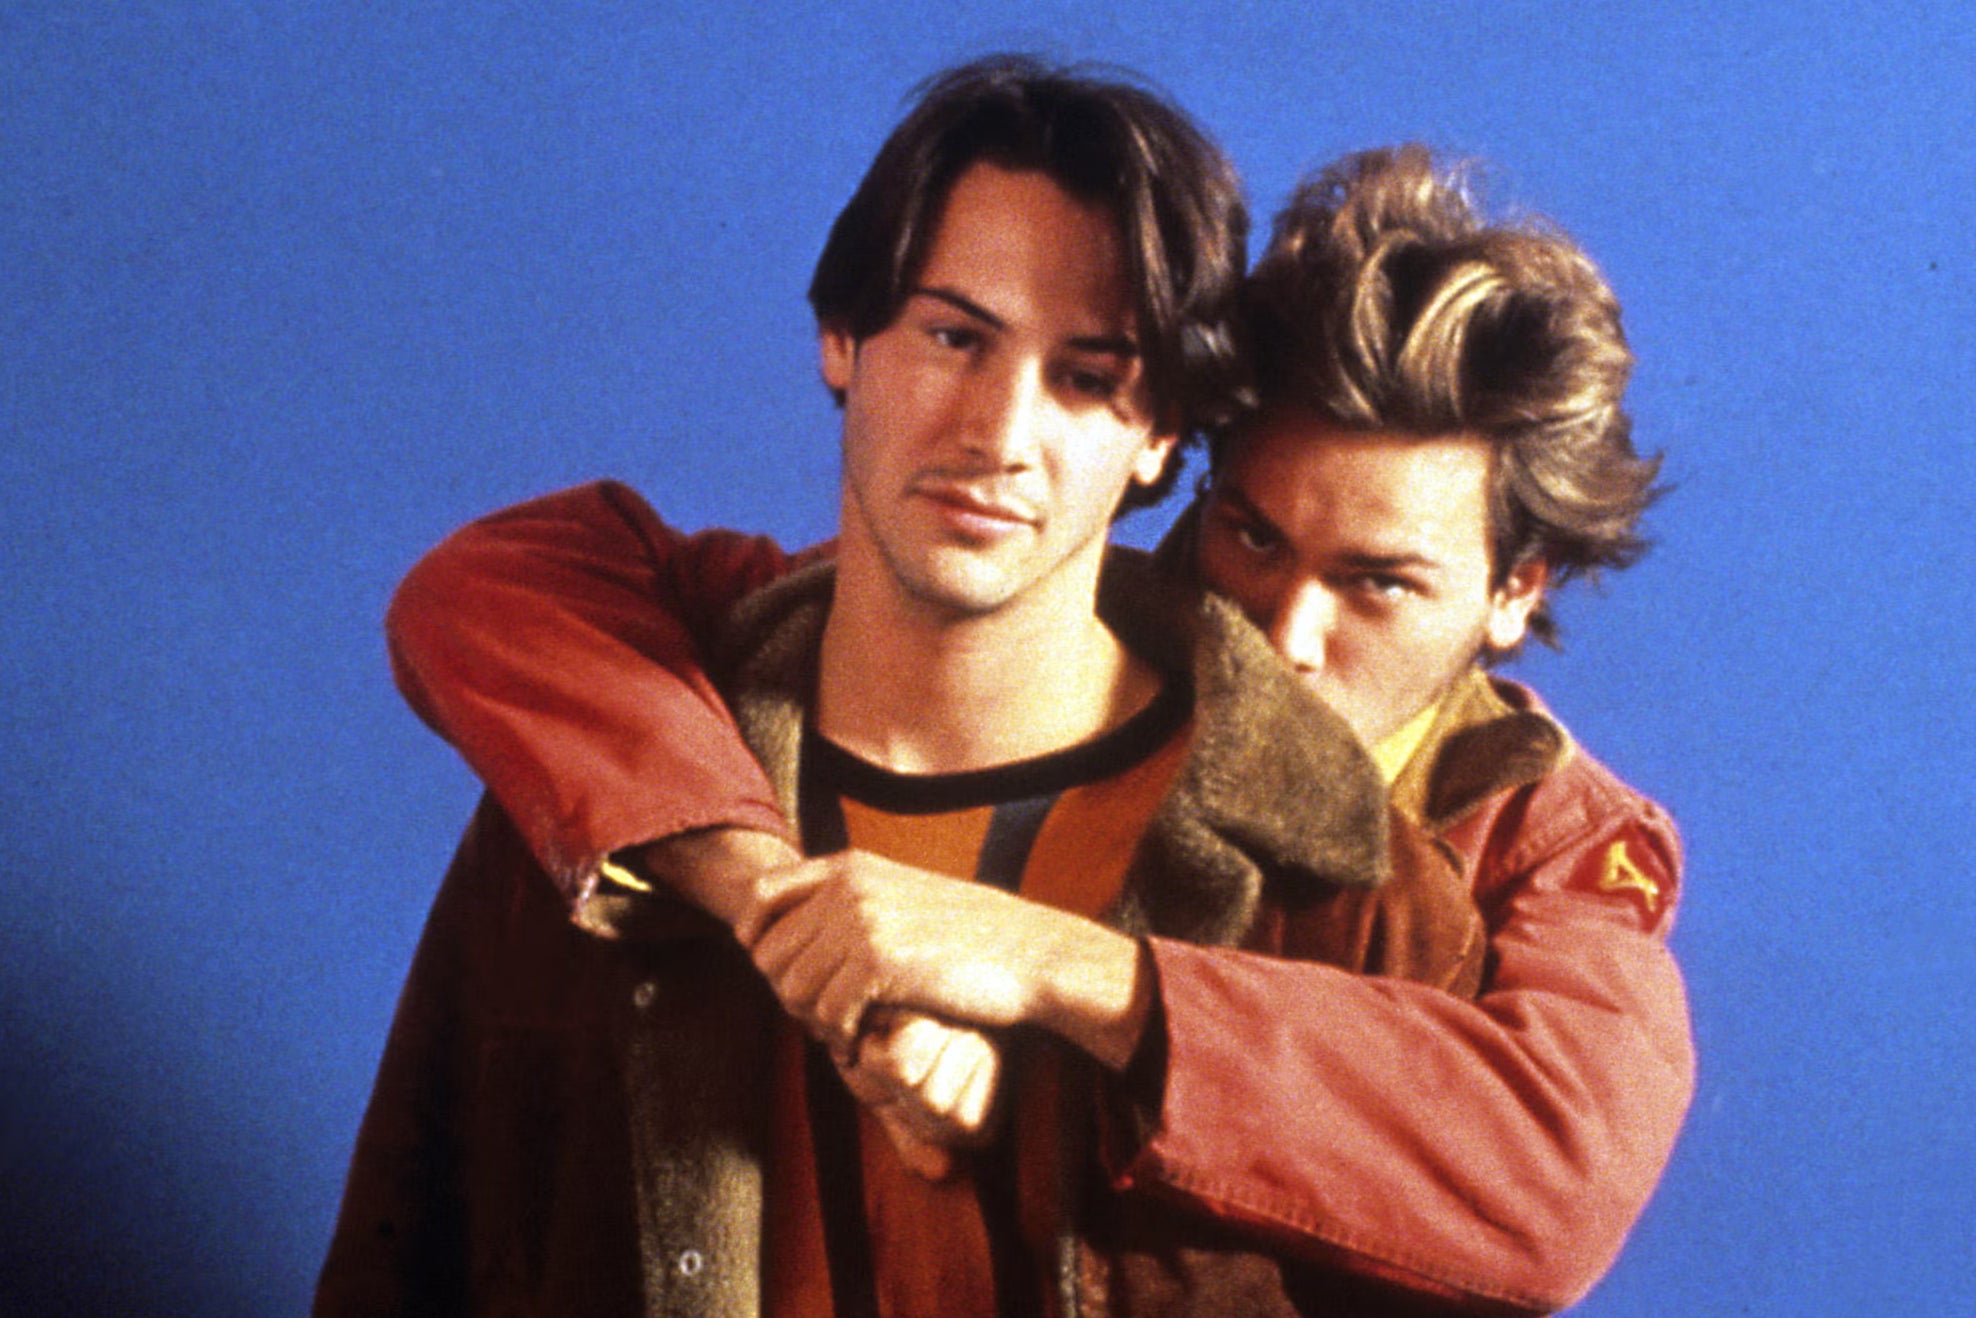 Connoisseurs of roads: Keanu Reeves and River Phoenix of ‘My Own Private Idaho’